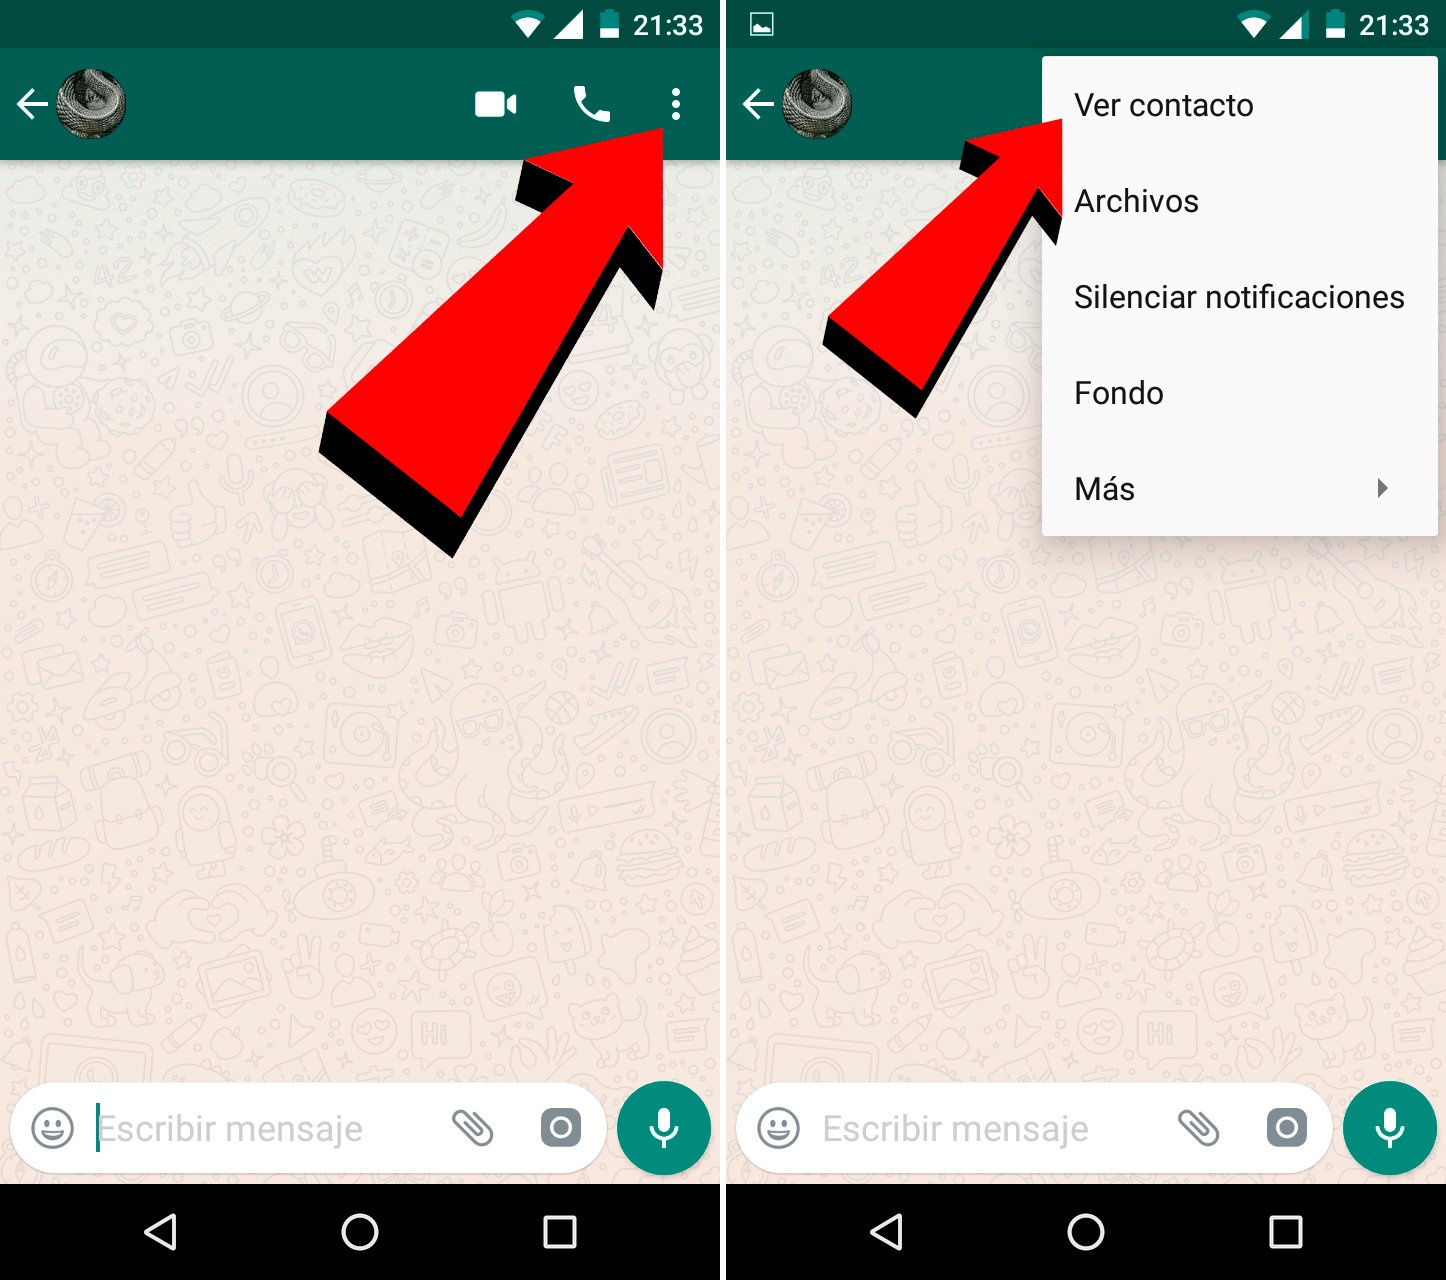 How to configure WhatsApp notifications